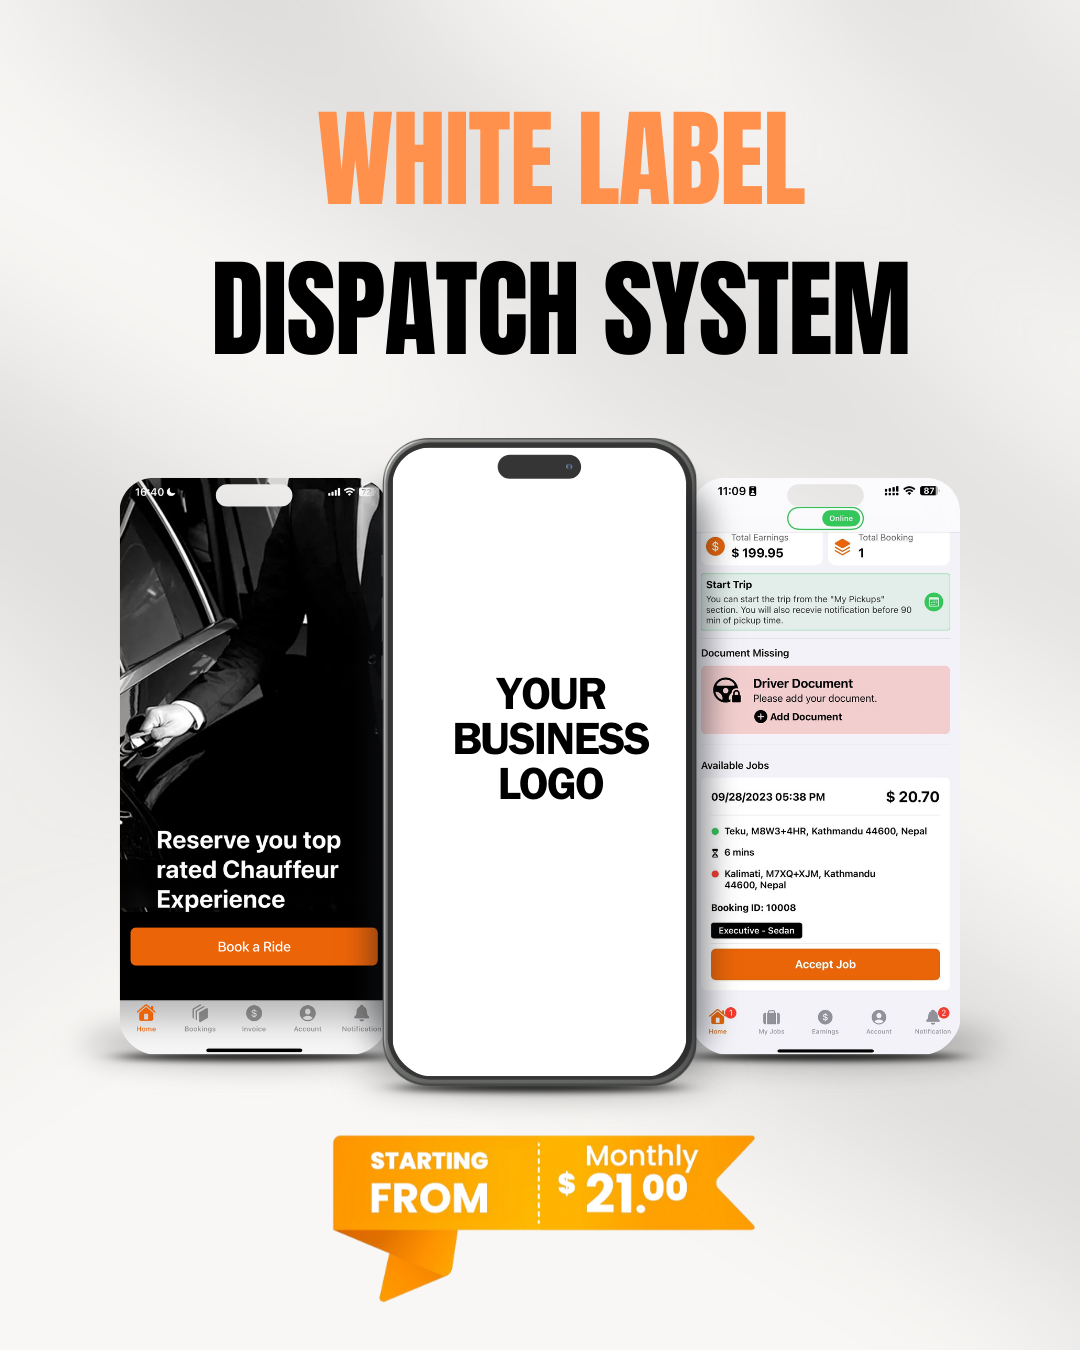 A to Z Dispatch White Label Limo Reservation Tool